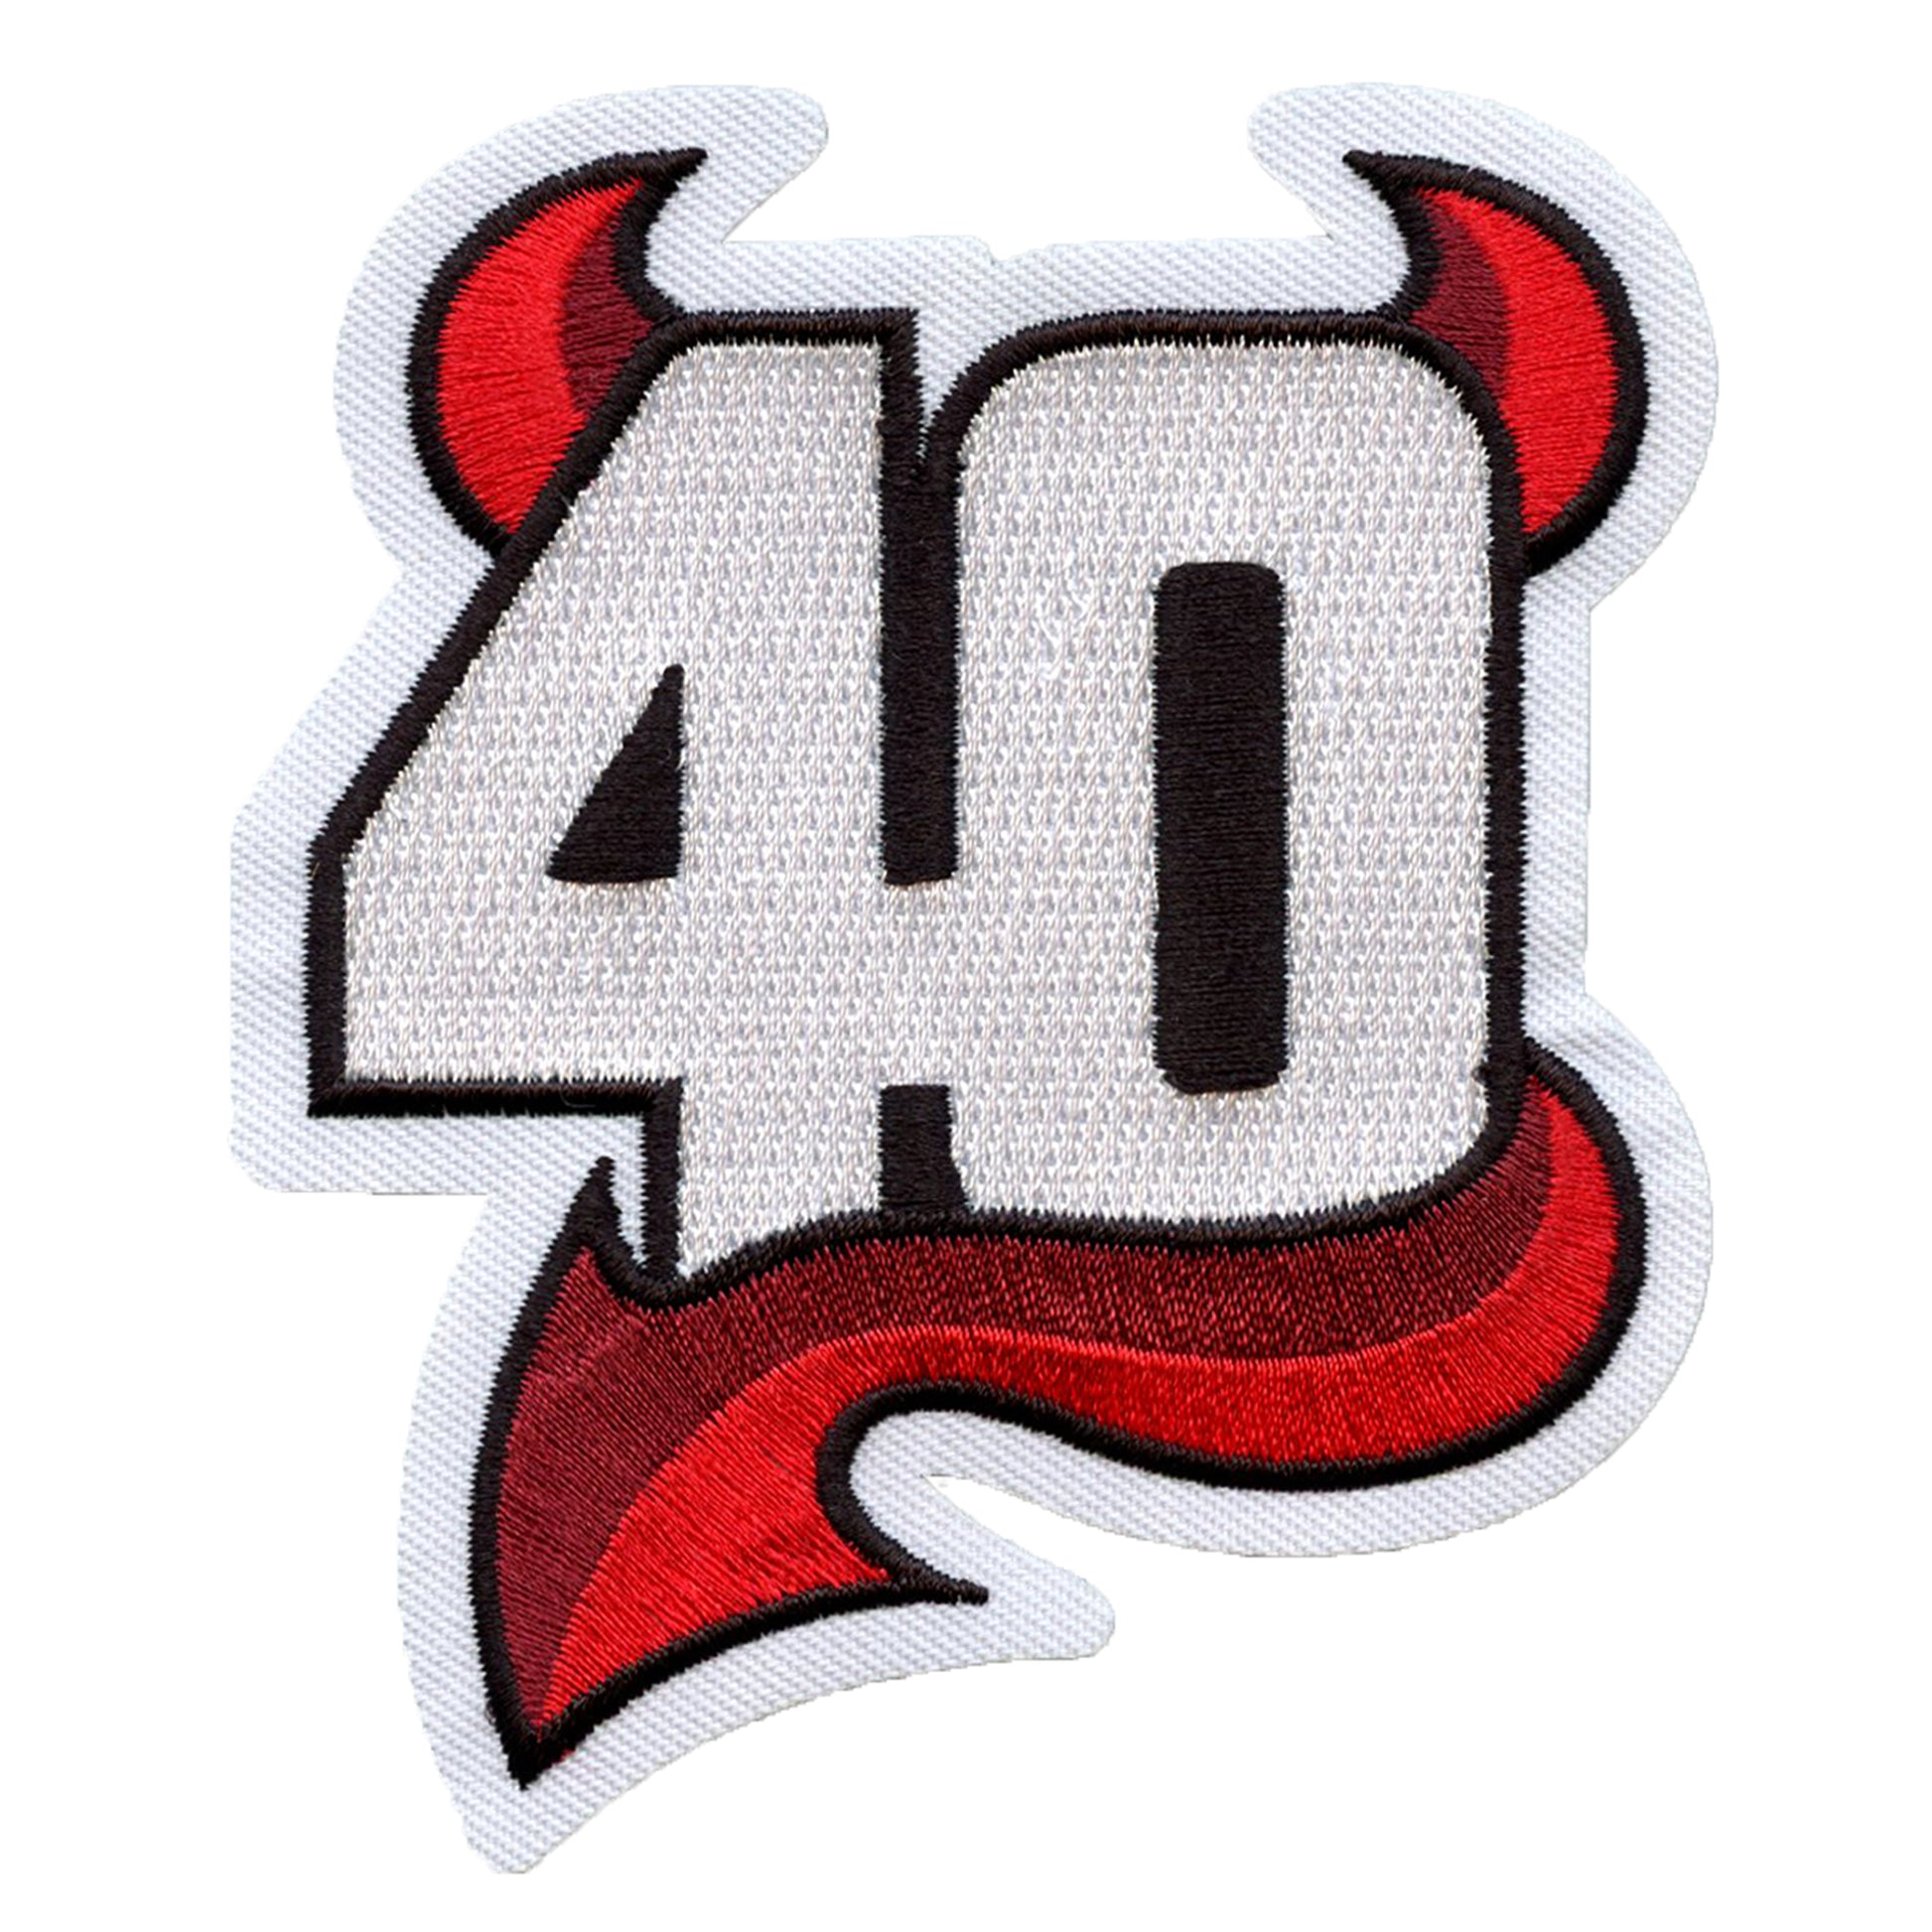 Anniversary Patches On The Shoulders?!?! - New Jersey Devils 40th